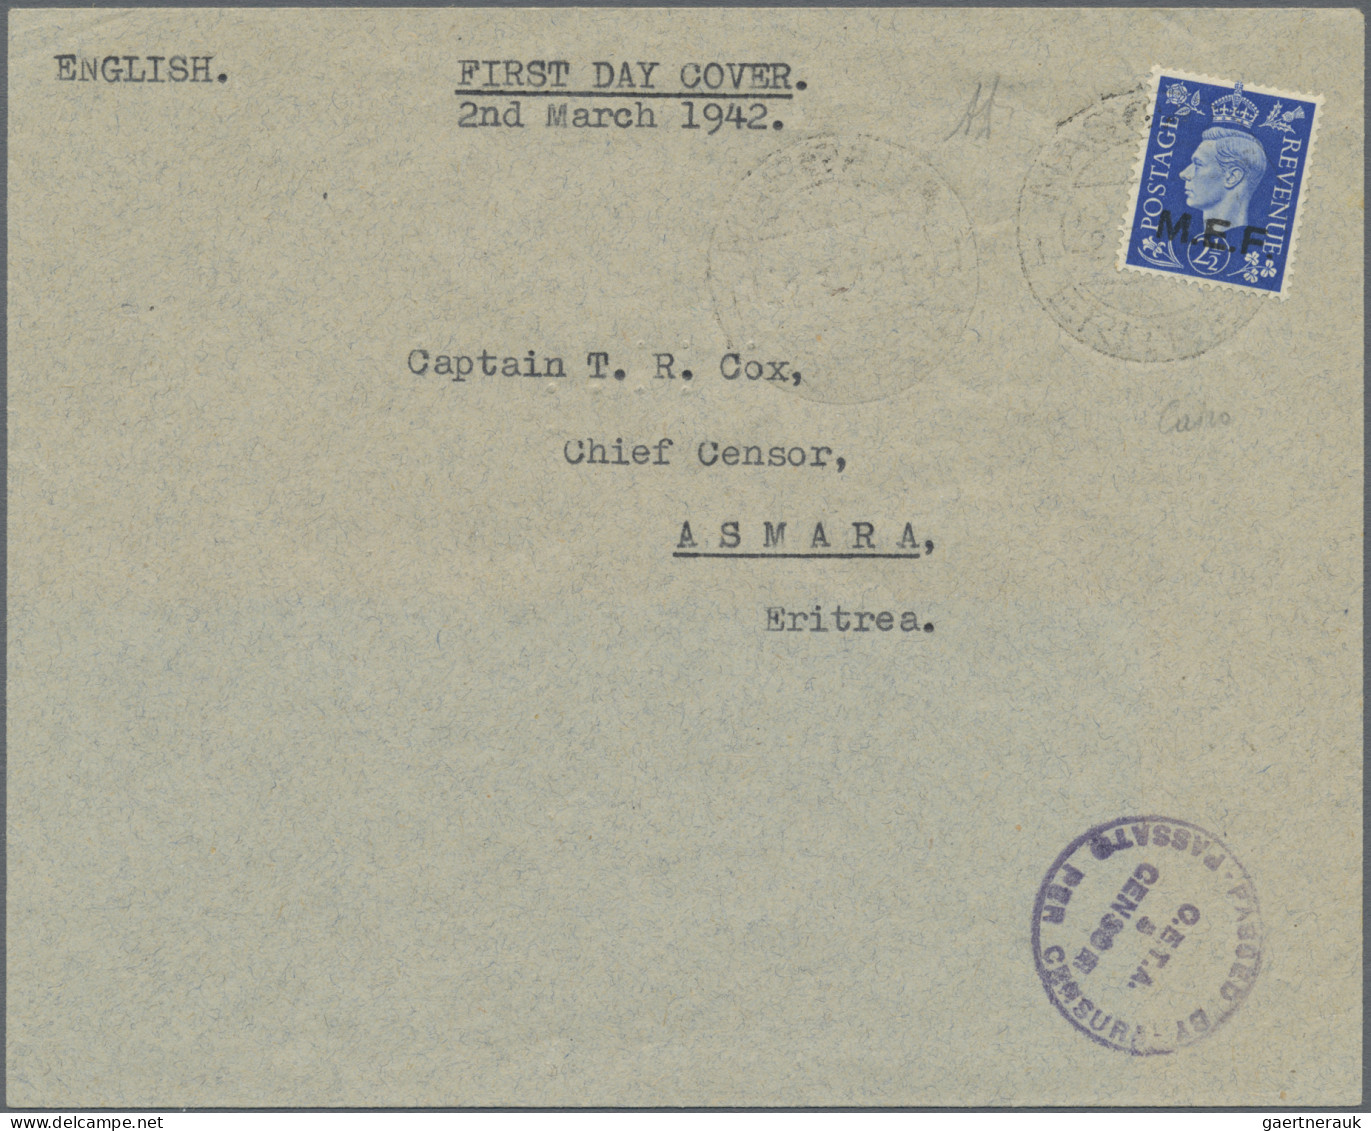 British Military Post  in WWII: 1942, Middle East Forces - NAIROBI OVERPRINT 1 d